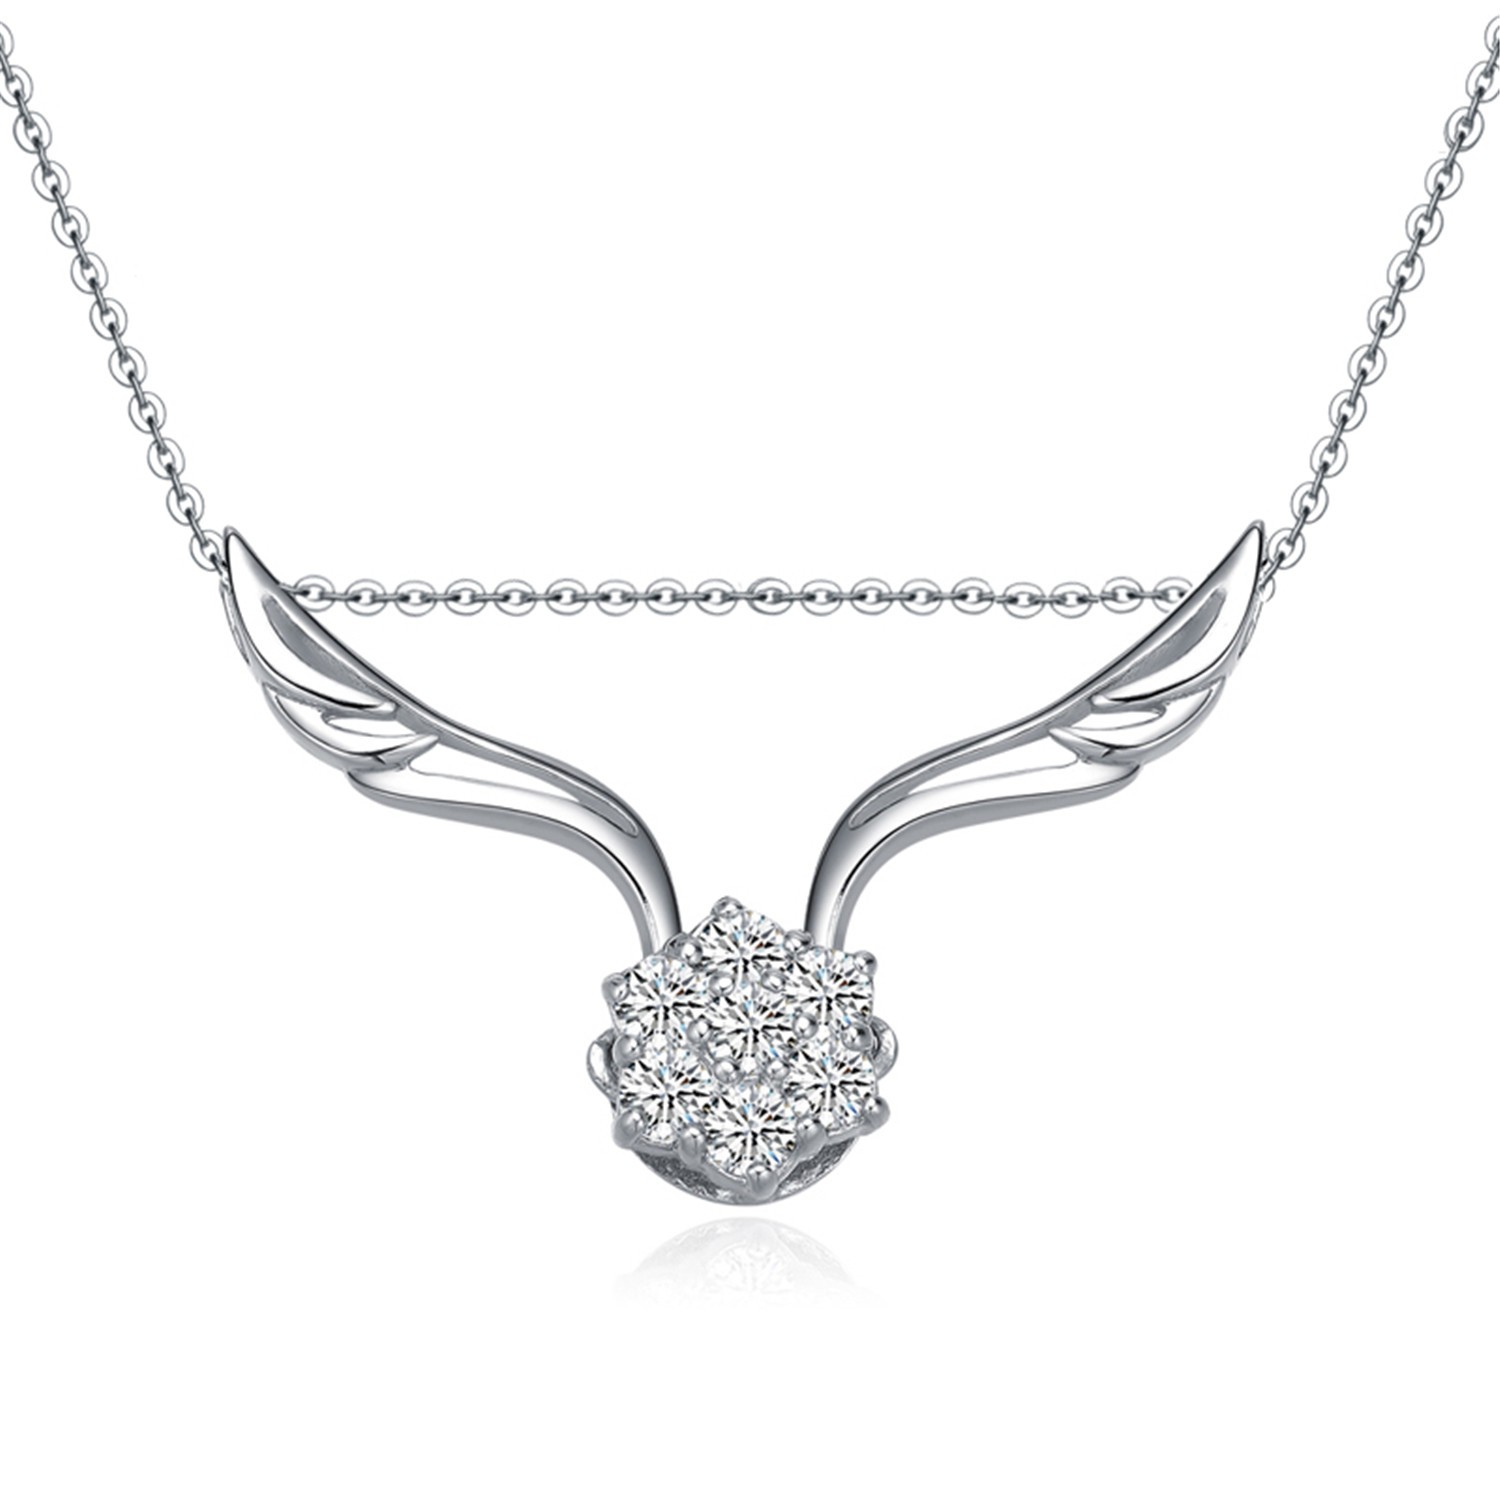  Nickel-Free Lead-Free jewelry 925 Sterling Silver cross chain Cubic Zirconia Wing Pendant Necklace